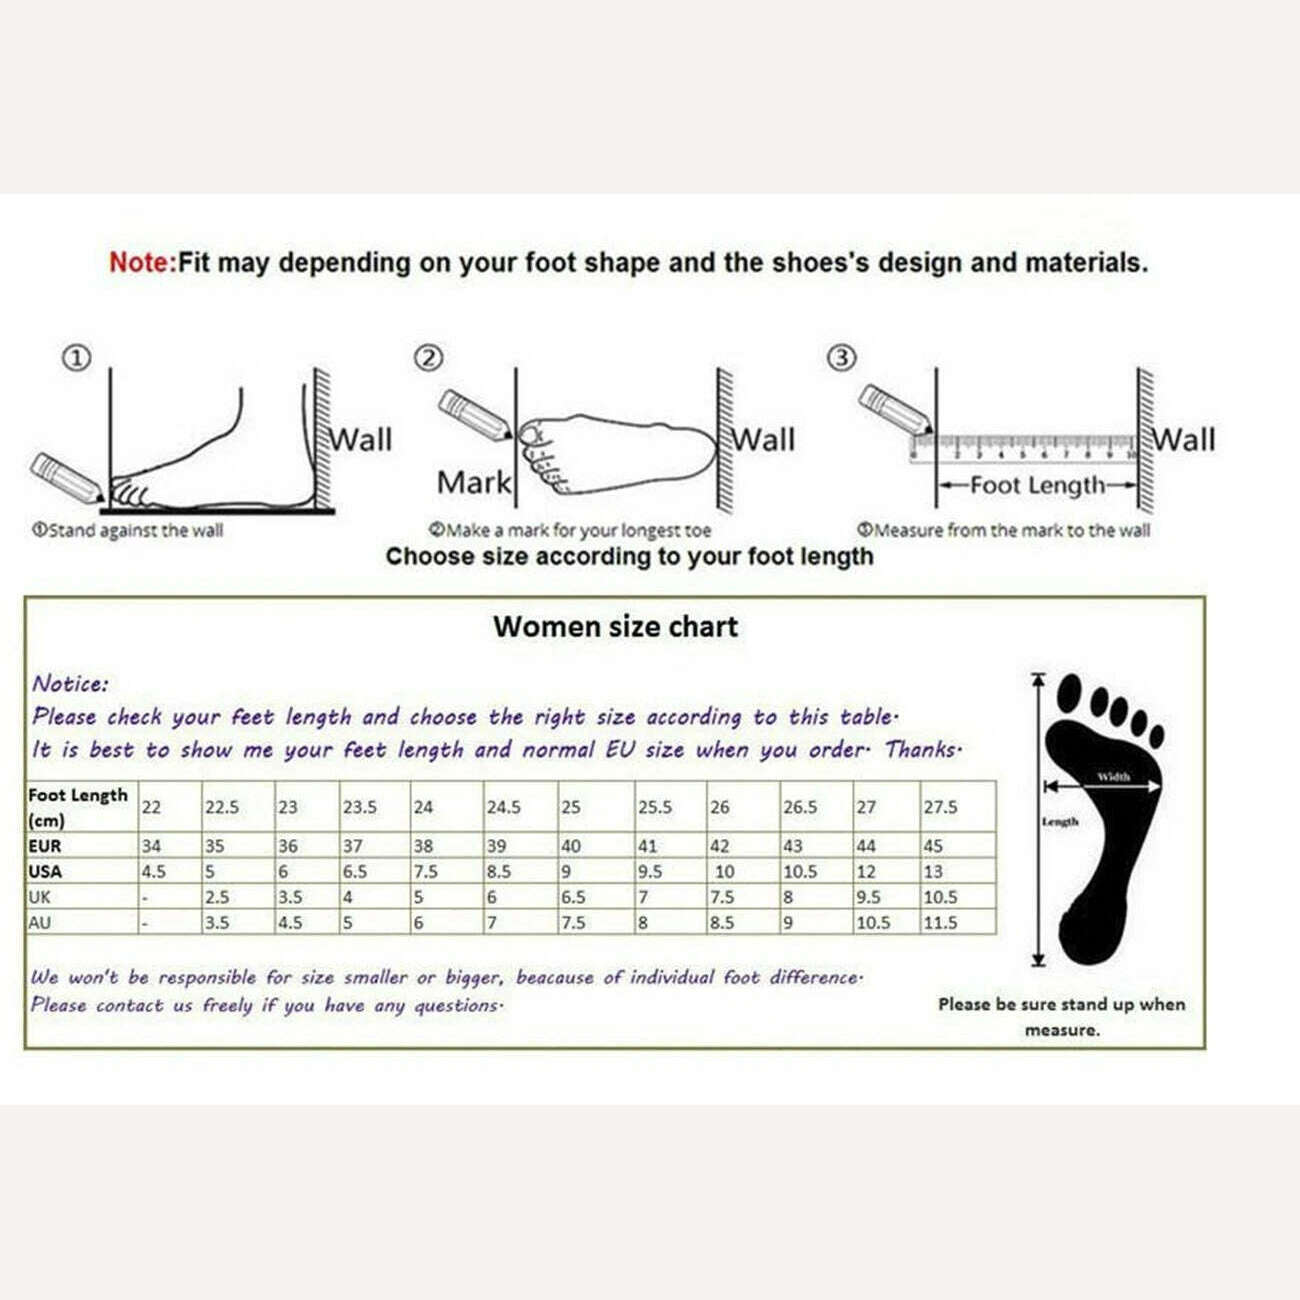 KIMLUD, Sestito Women Sexy Side Zipper Thigh High Boots Female Belt Trousers Boots Ladies Flock Pointed Toe Suqare High Heels Boots, KIMLUD Womens Clothes